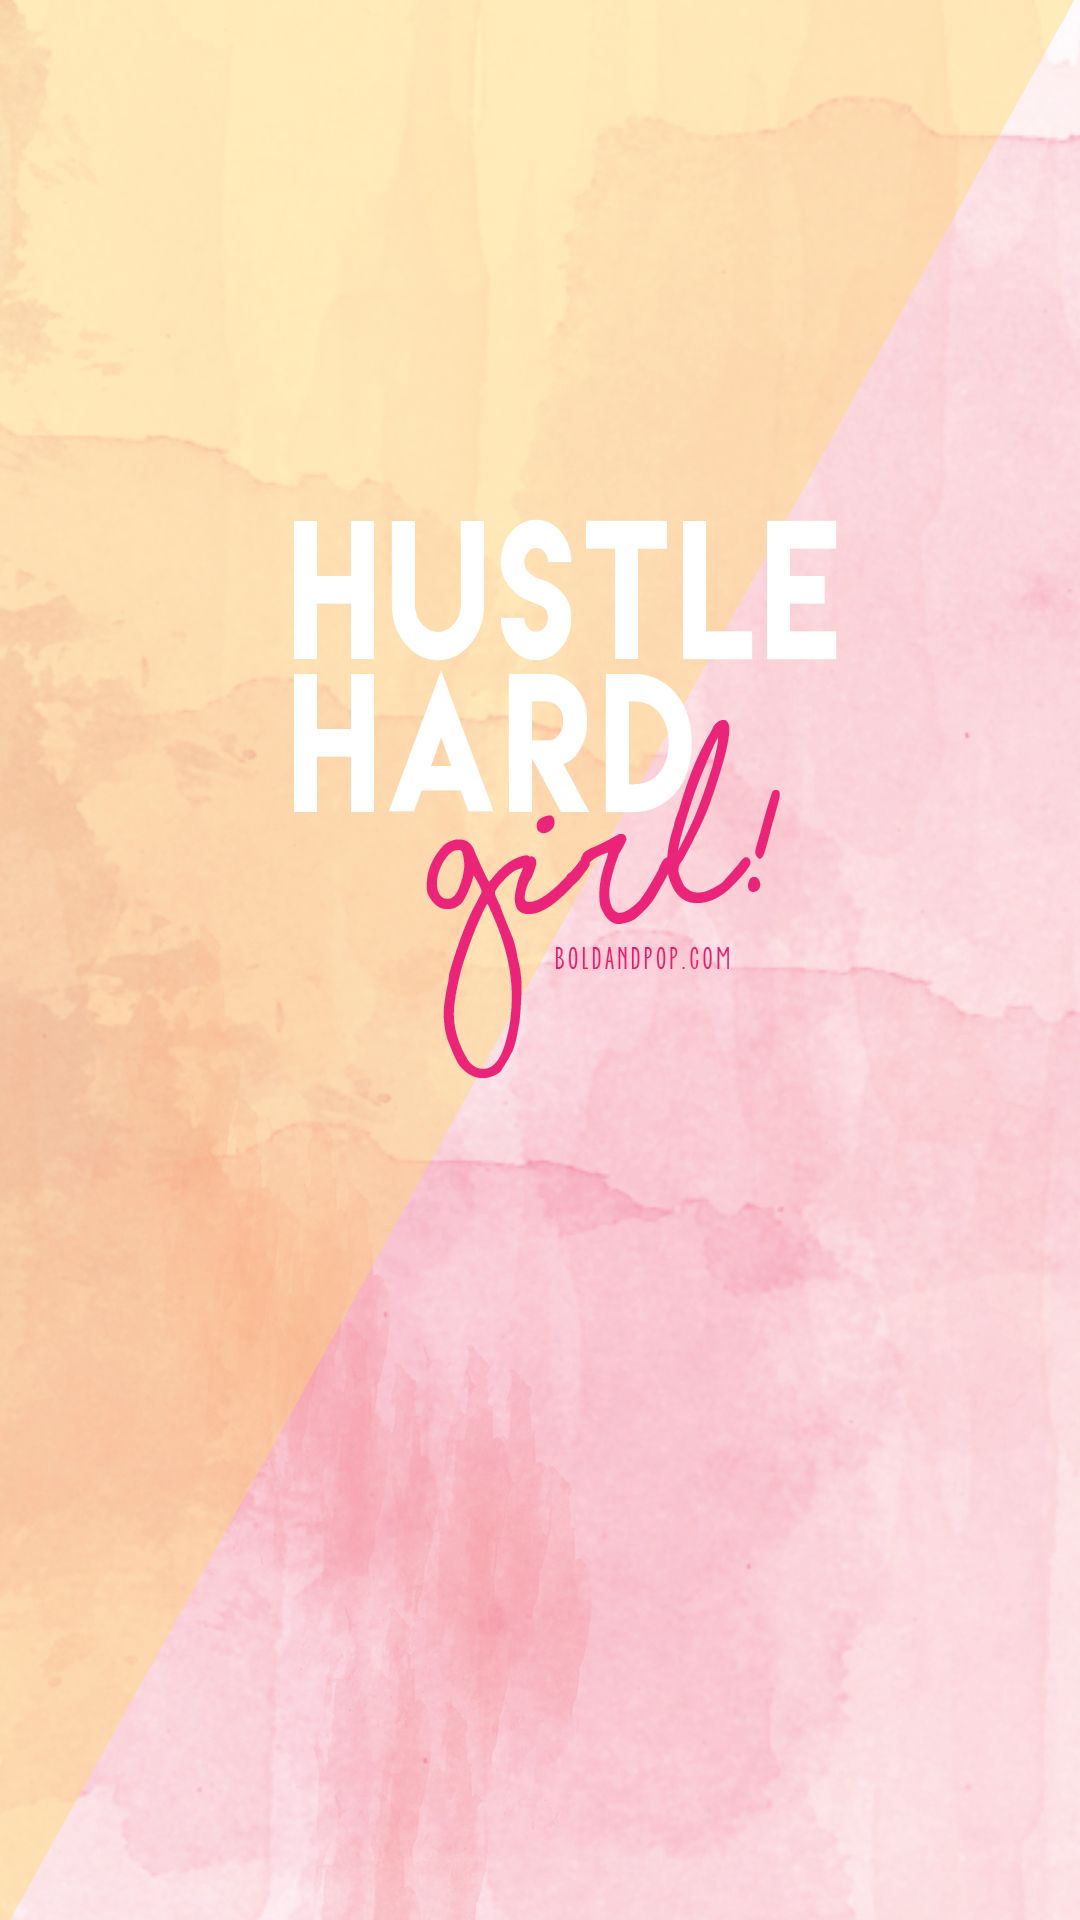 hustle quotes for girls